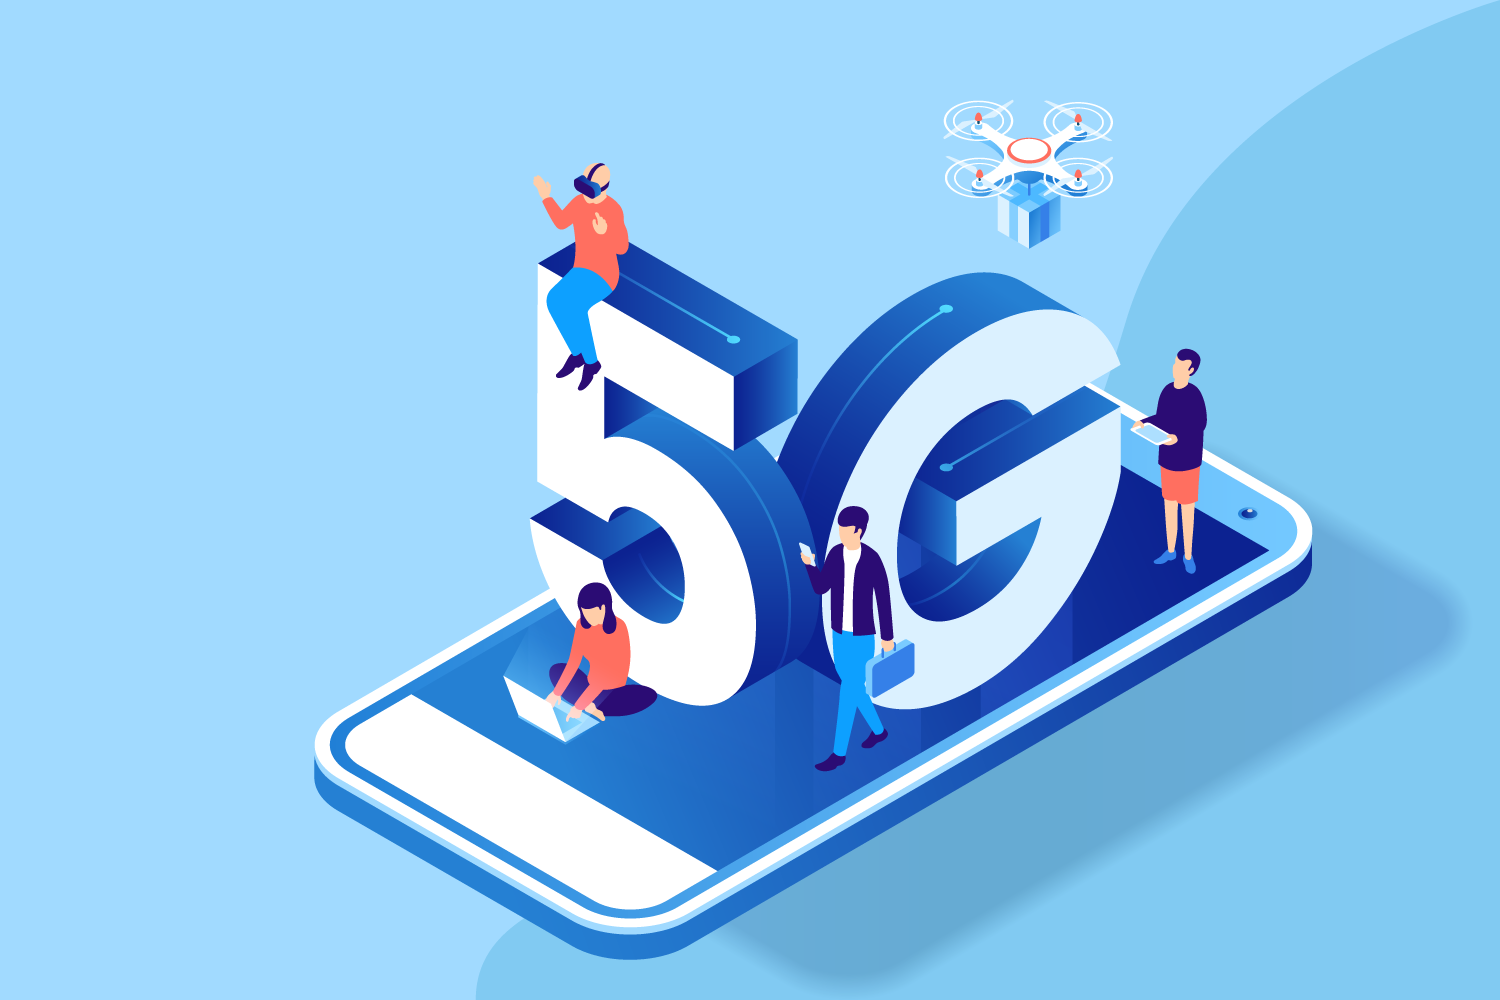 Work With 5G Telecom Solutions